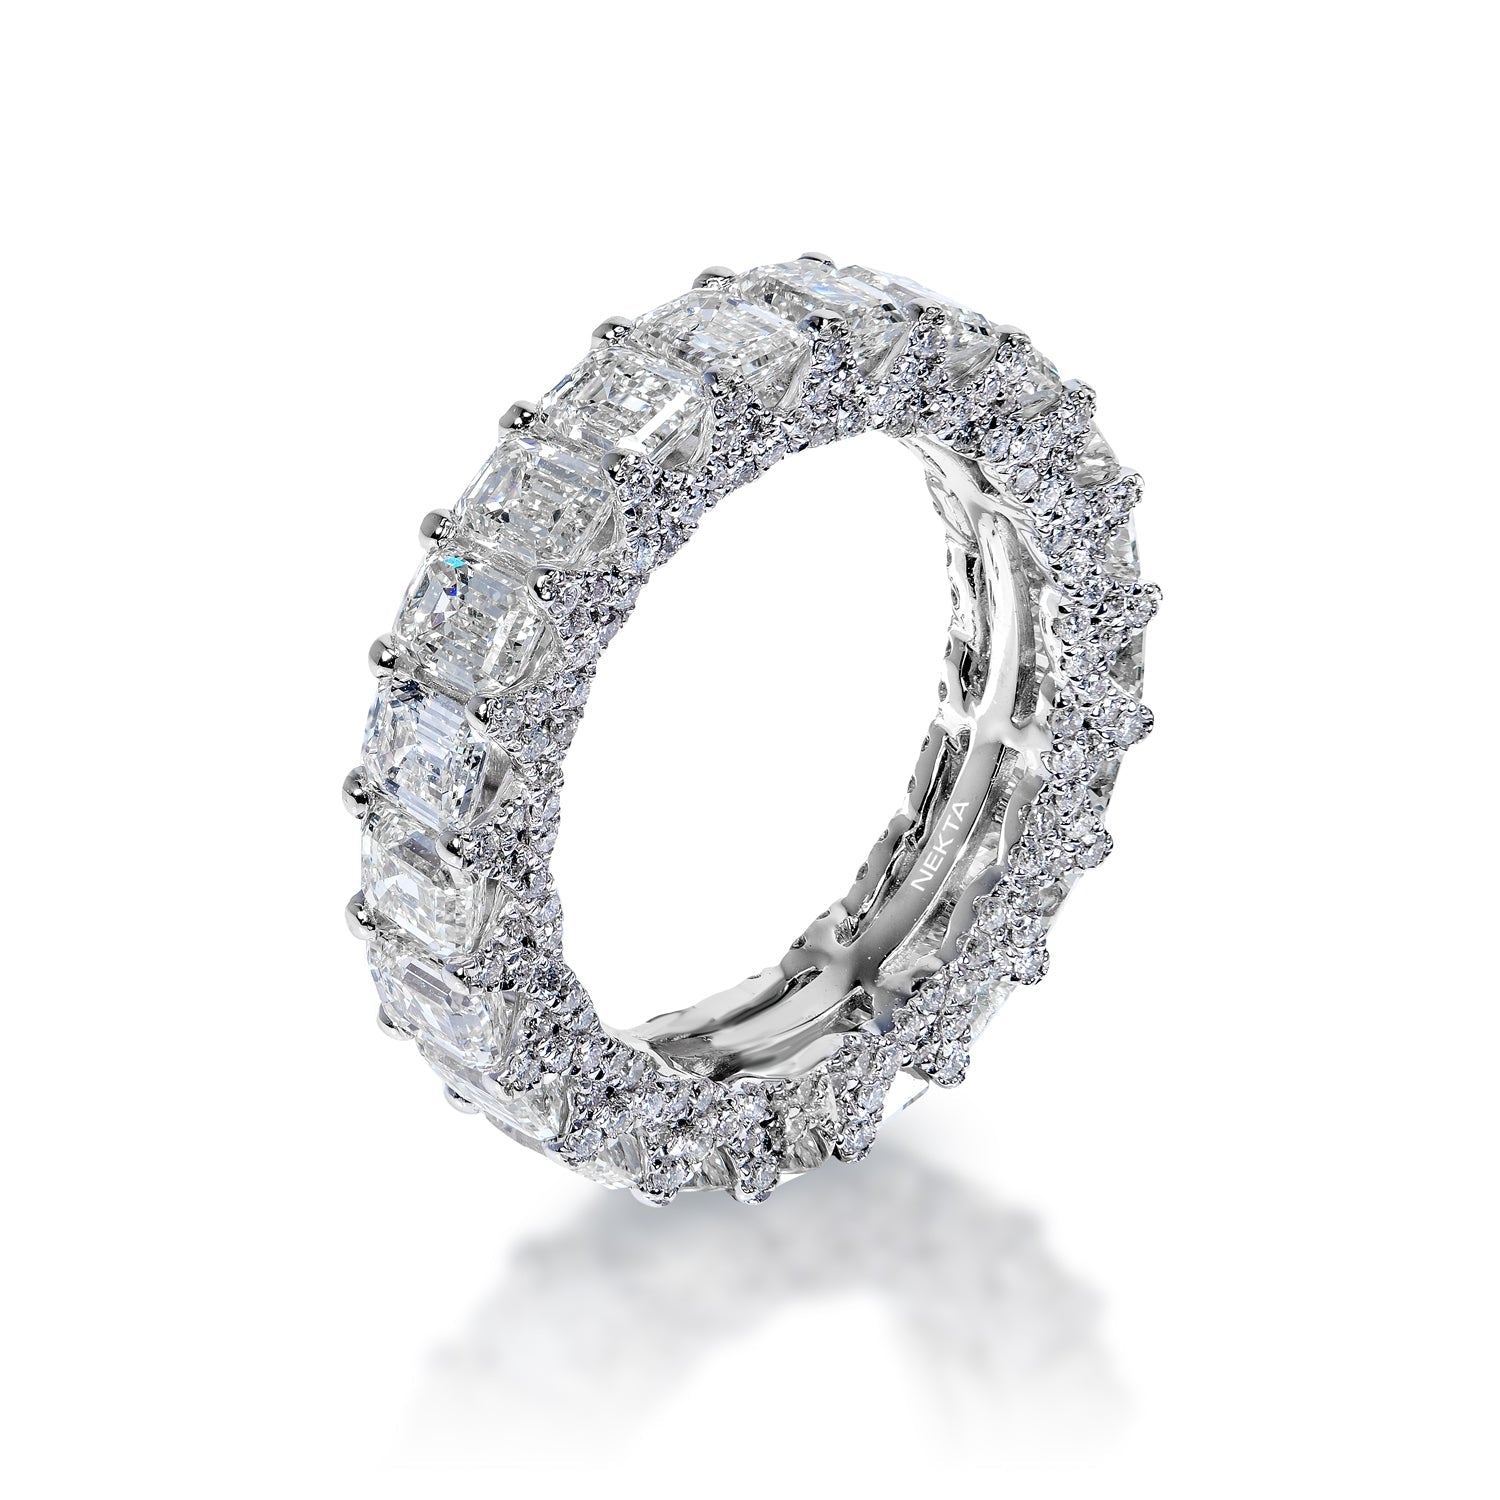 Marie 5 Carat Emerald Cut Diamond Eternity Band  in 14k White Gold Shared Prong Side View